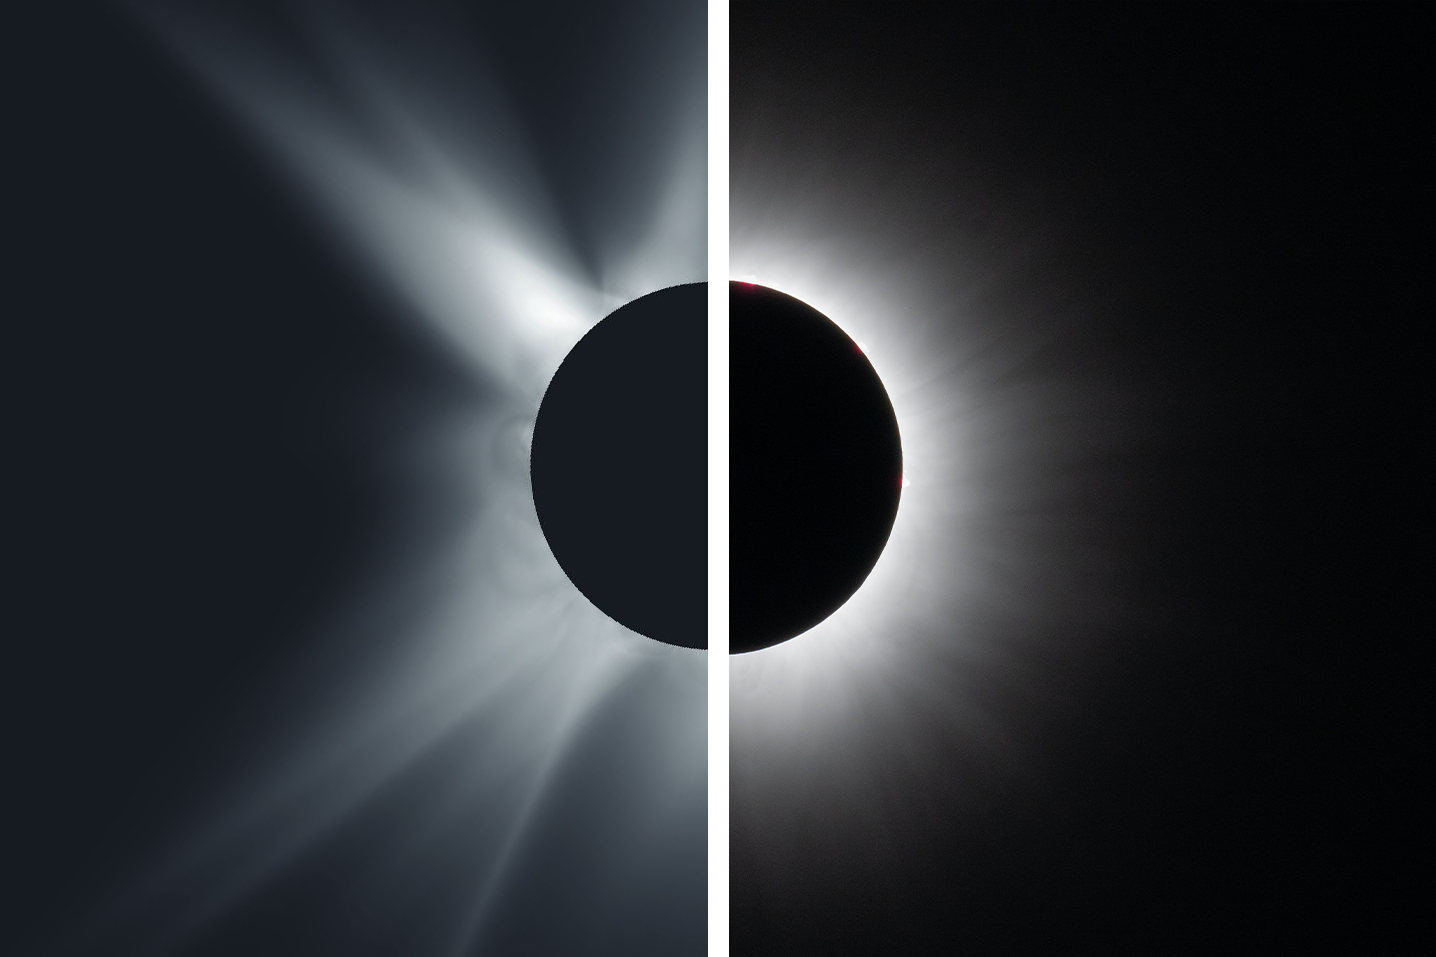 An image comparing a solar corona model on the left and an actual image of the solar corona on the right. A white line vertically cuts through the middle of the image.